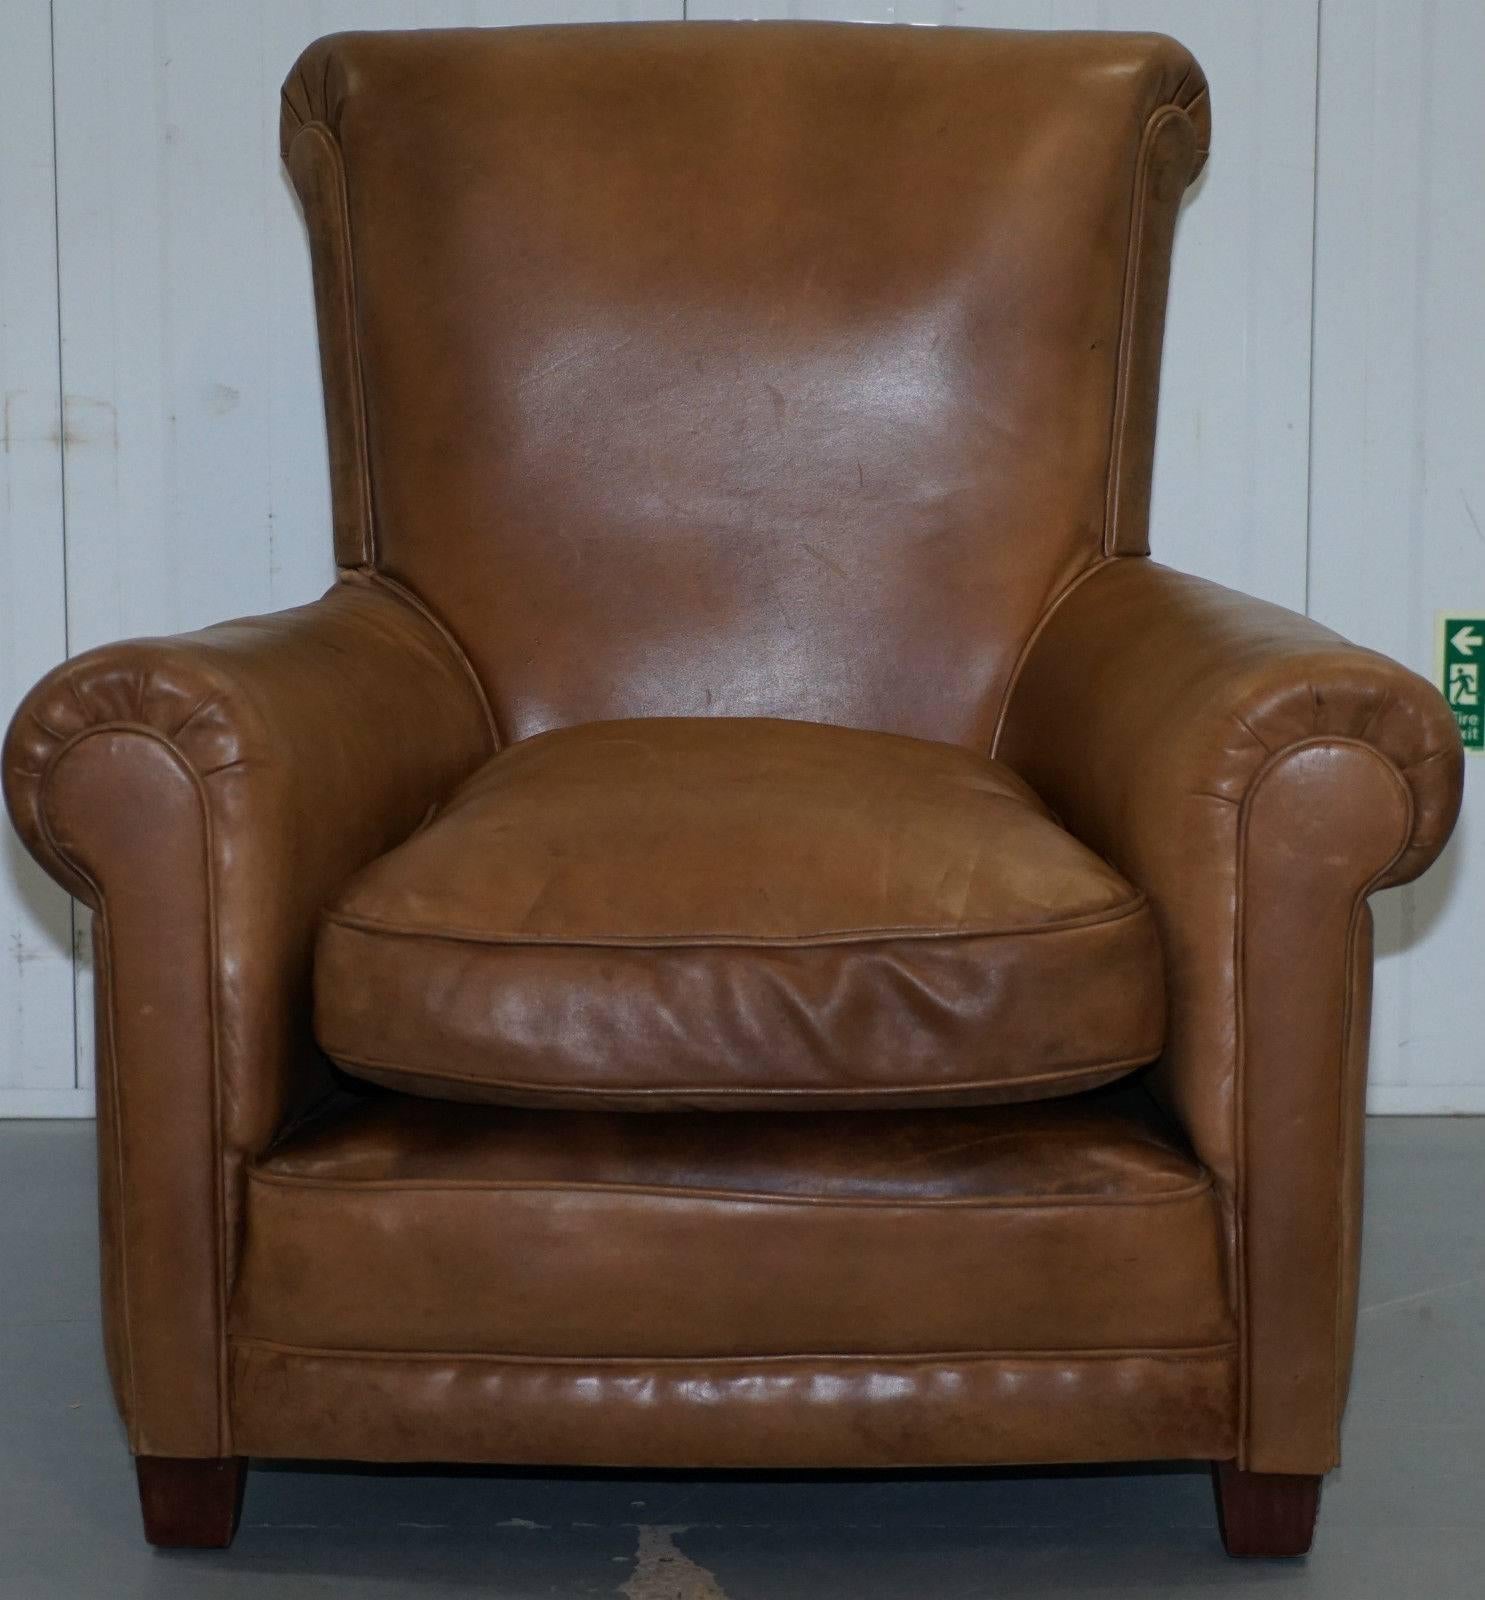 We are delighted to offer for auction this antique hand dyed aged tan brown leather club armchair

Please note the delivery fee listed is just a guide, for an accurate quote please send me your postcode and I’ll price it up for you

This is a lovely